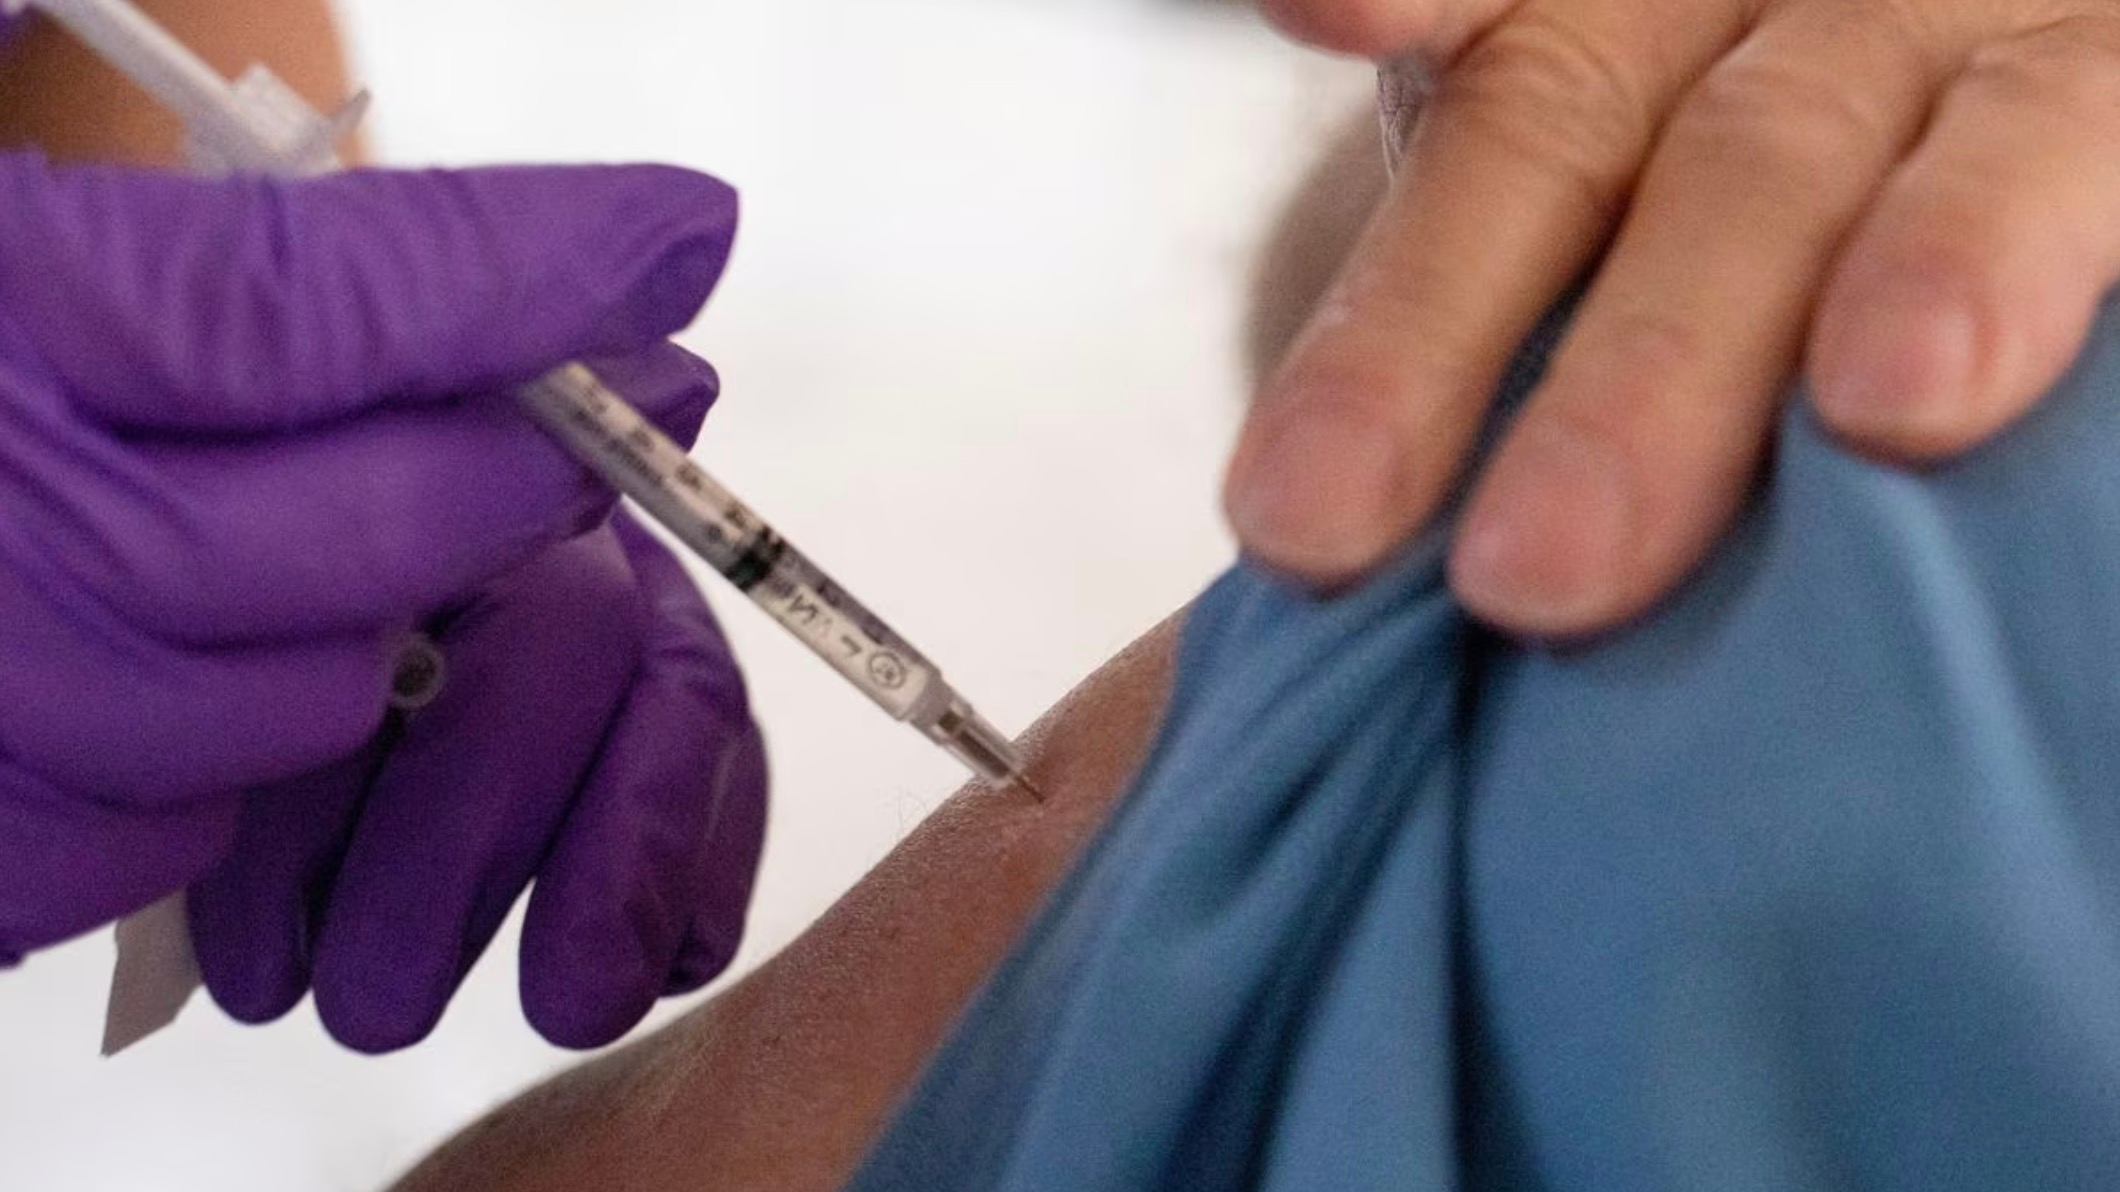 A 50-year-old and immunocompromised resident receives a second booster shot of the coronavirus disease (COVID-19) vaccine in Waterford, Michigan, U.S., April 8, 2022. /Reuters